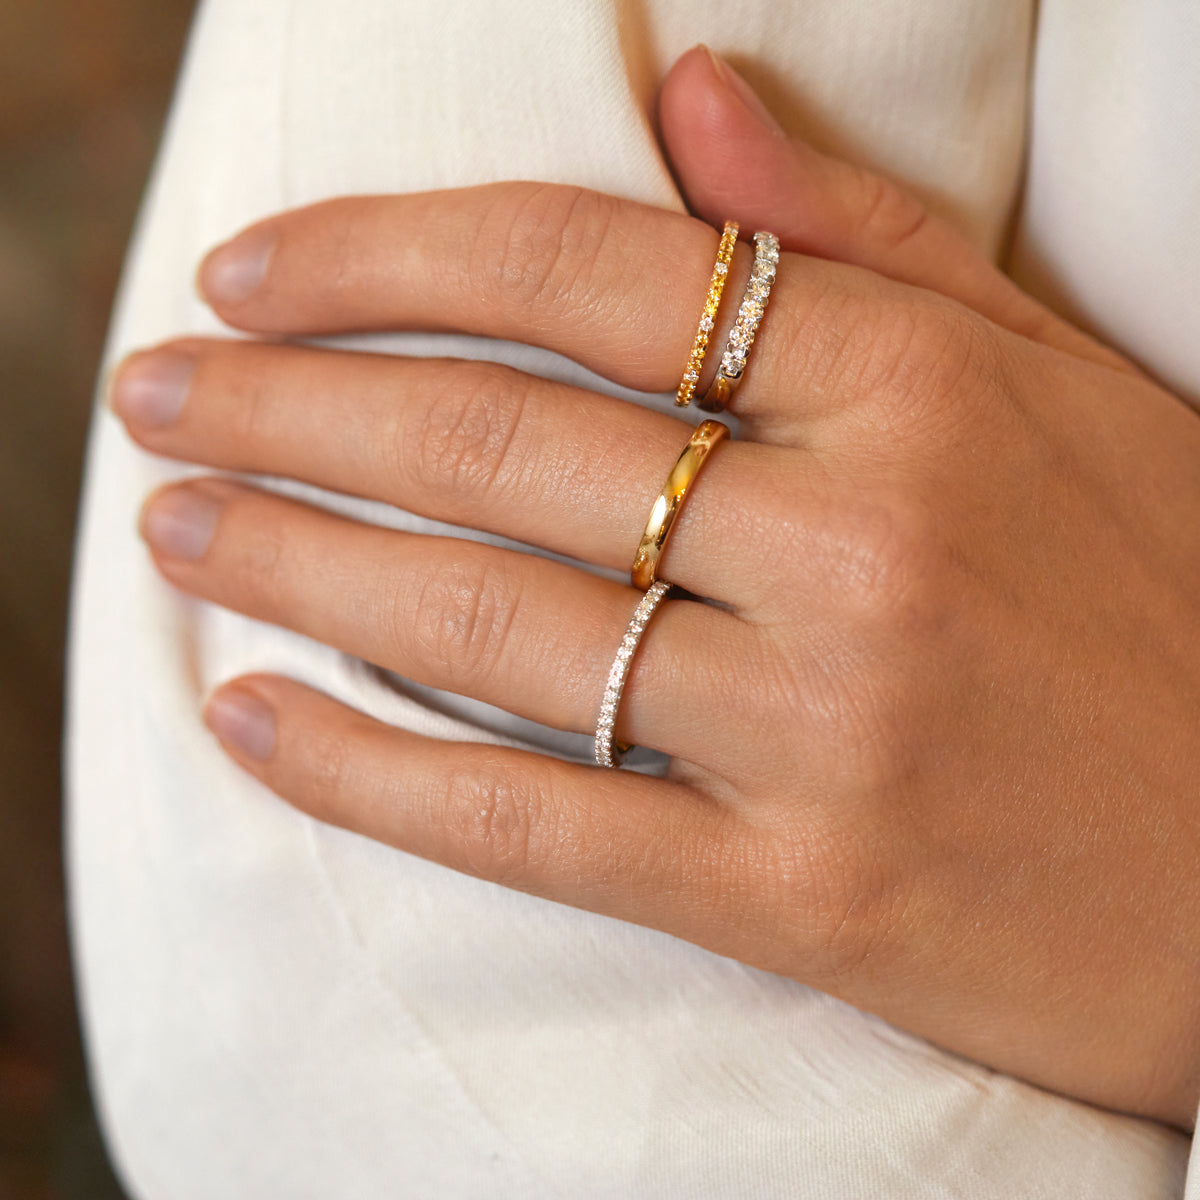 How to Match a Wedding Band and Engagement Ring - International